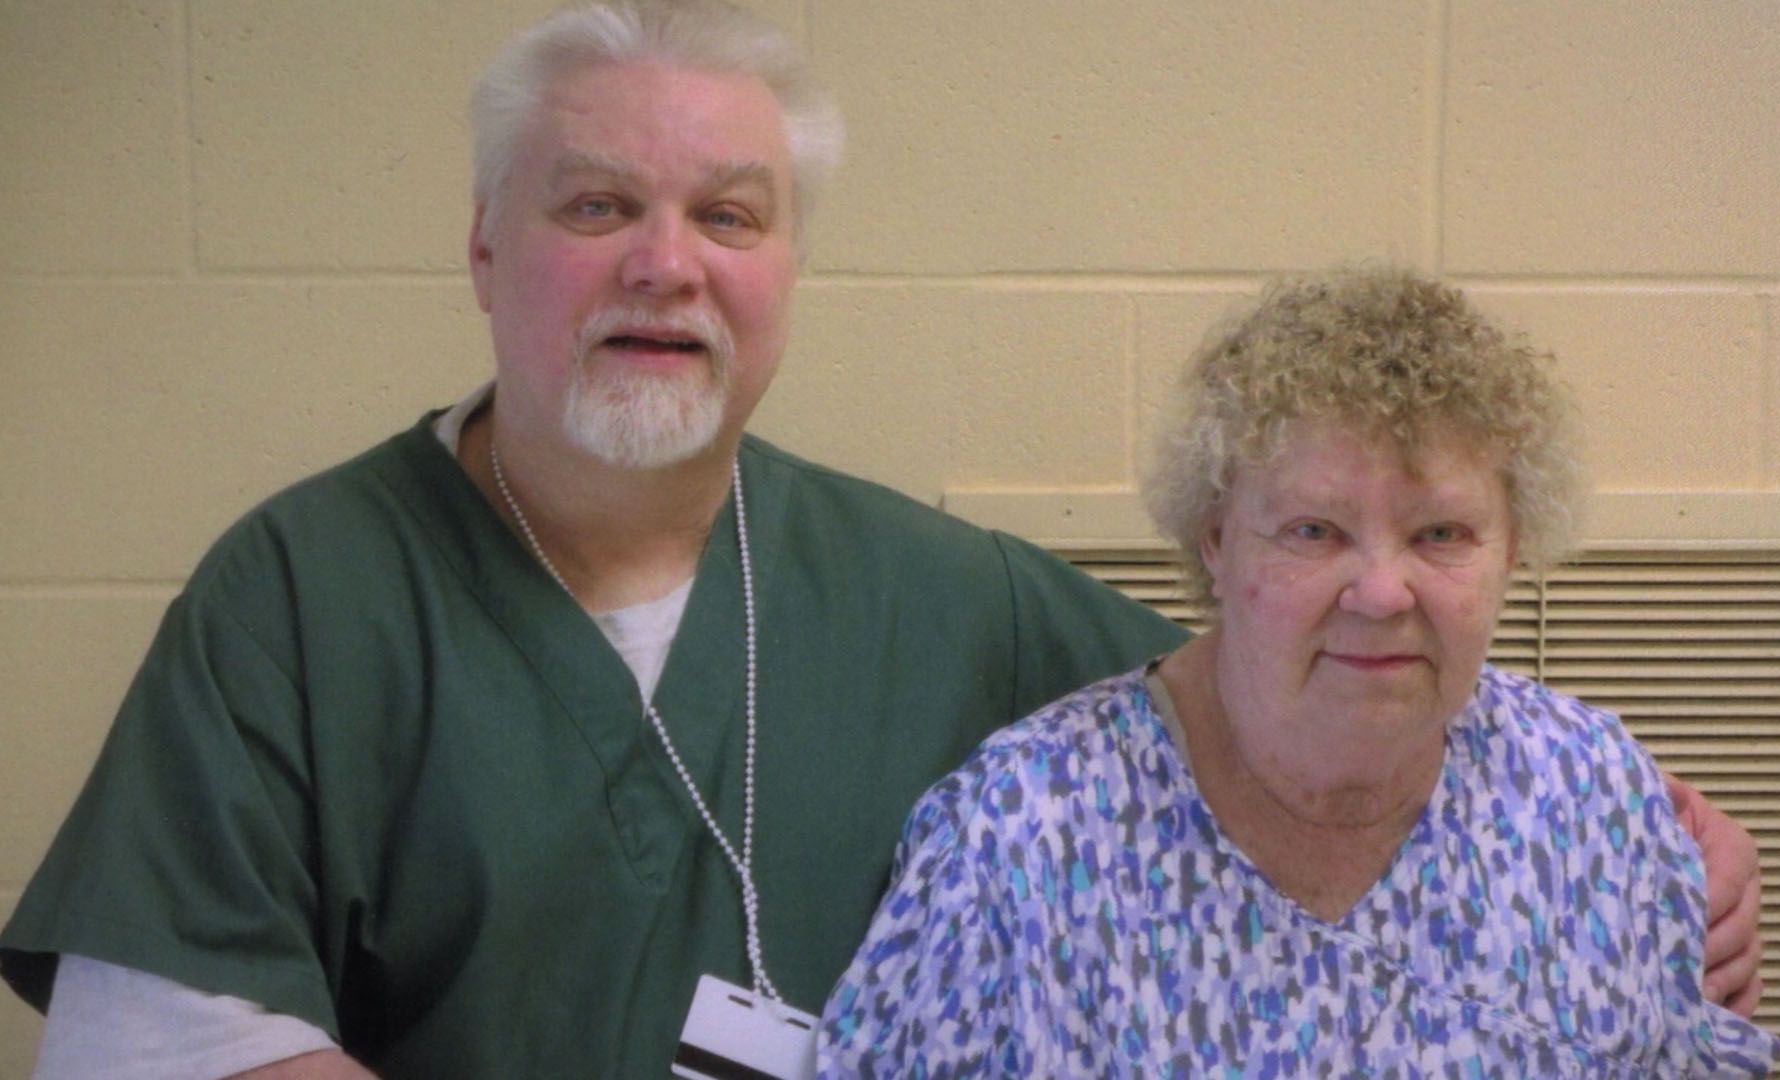 Making a Murderer subject Steven Avery's mum Dolores dies at 83